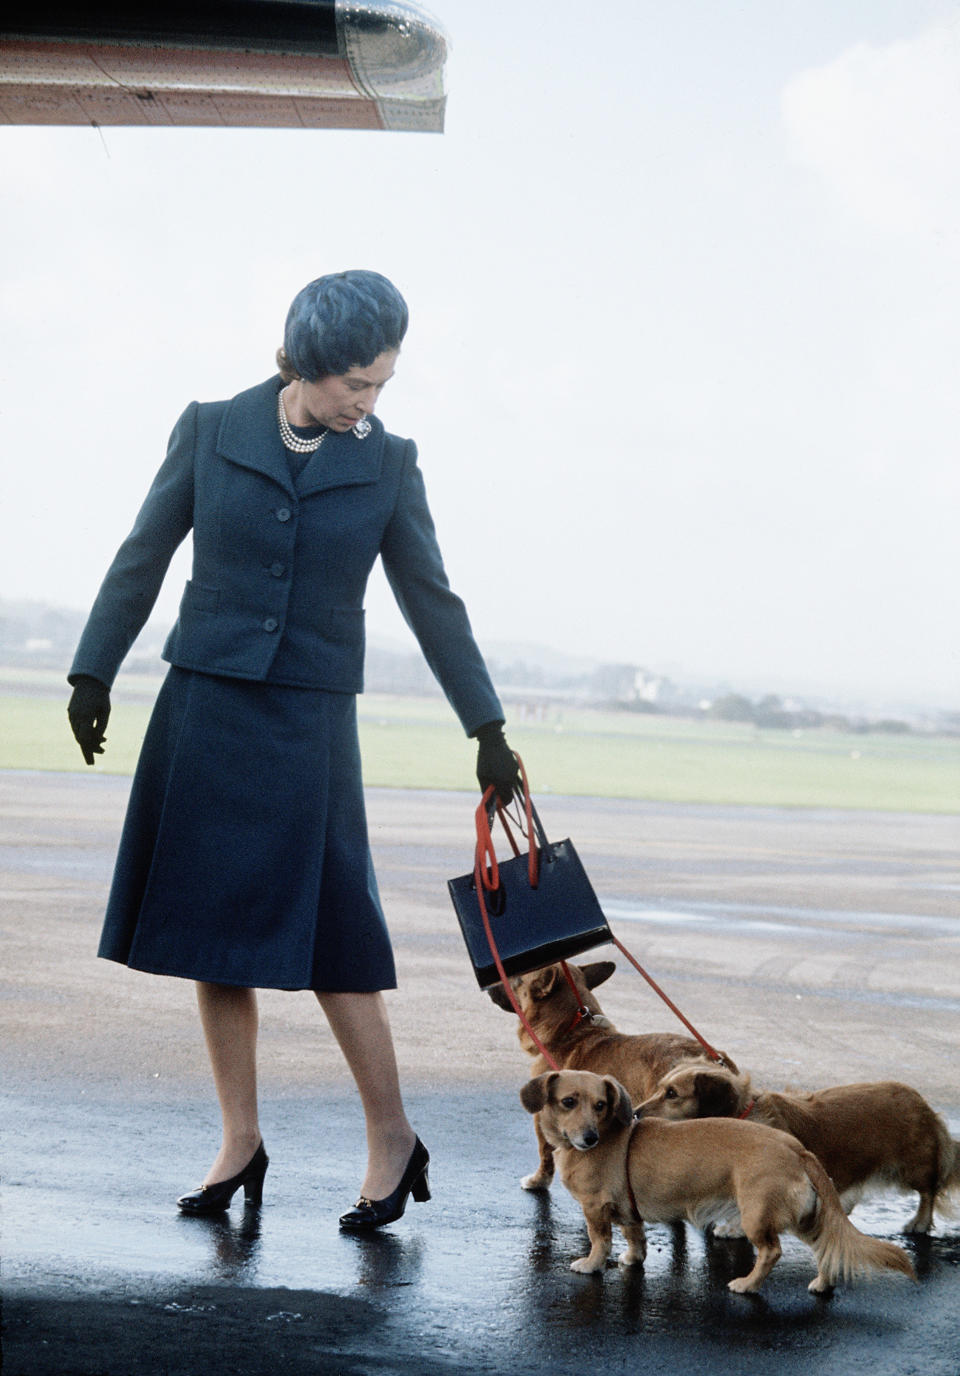 Queen Elizabeth arriving at Balmoral in 1974 with her corgis